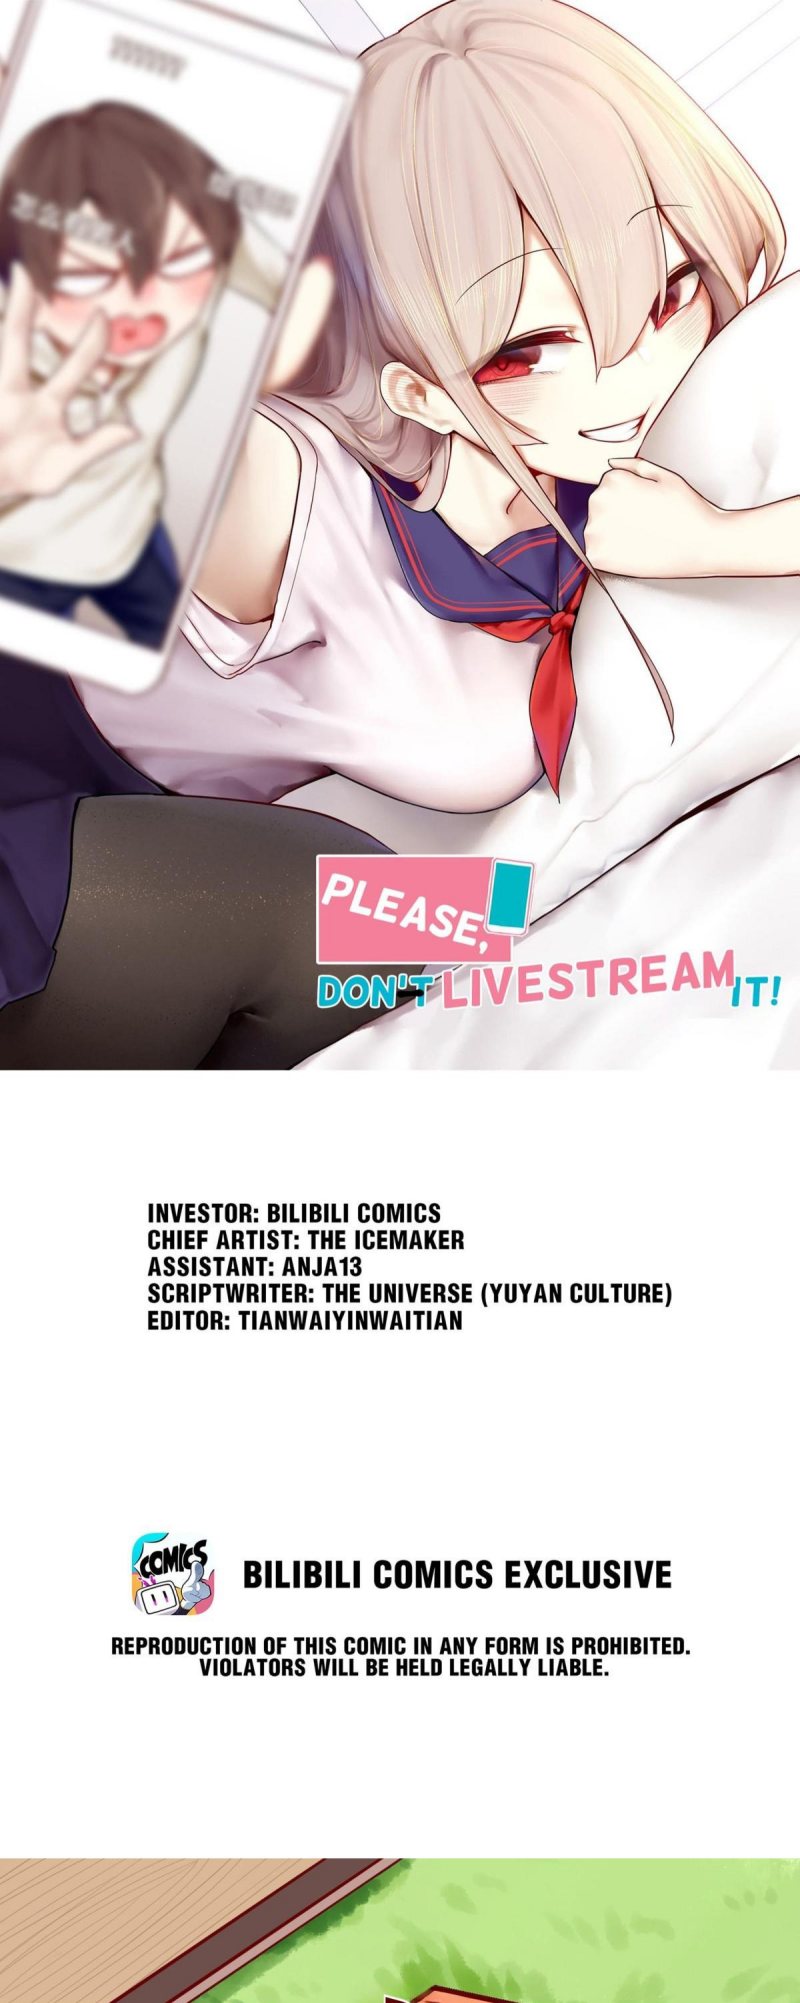 Miss, don’t livestream it! Chapter 63